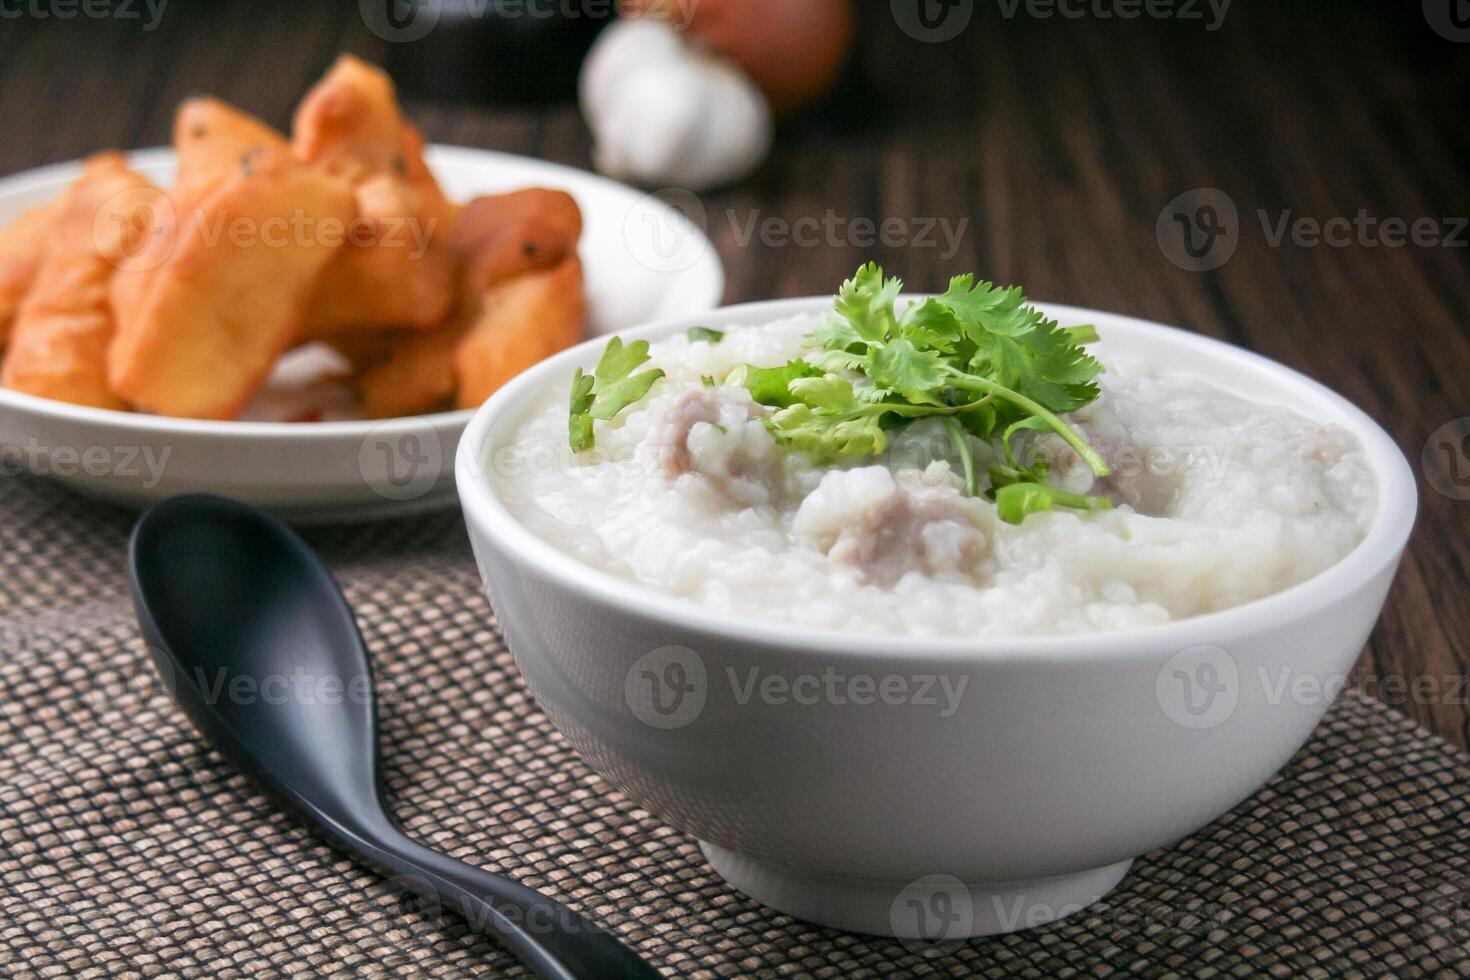 Pork porridge with coriander and ginger or porridge is similar to rice porridge but softer in texture. Served on a wooden table with patongko. For breakfast in the morning or evening photo